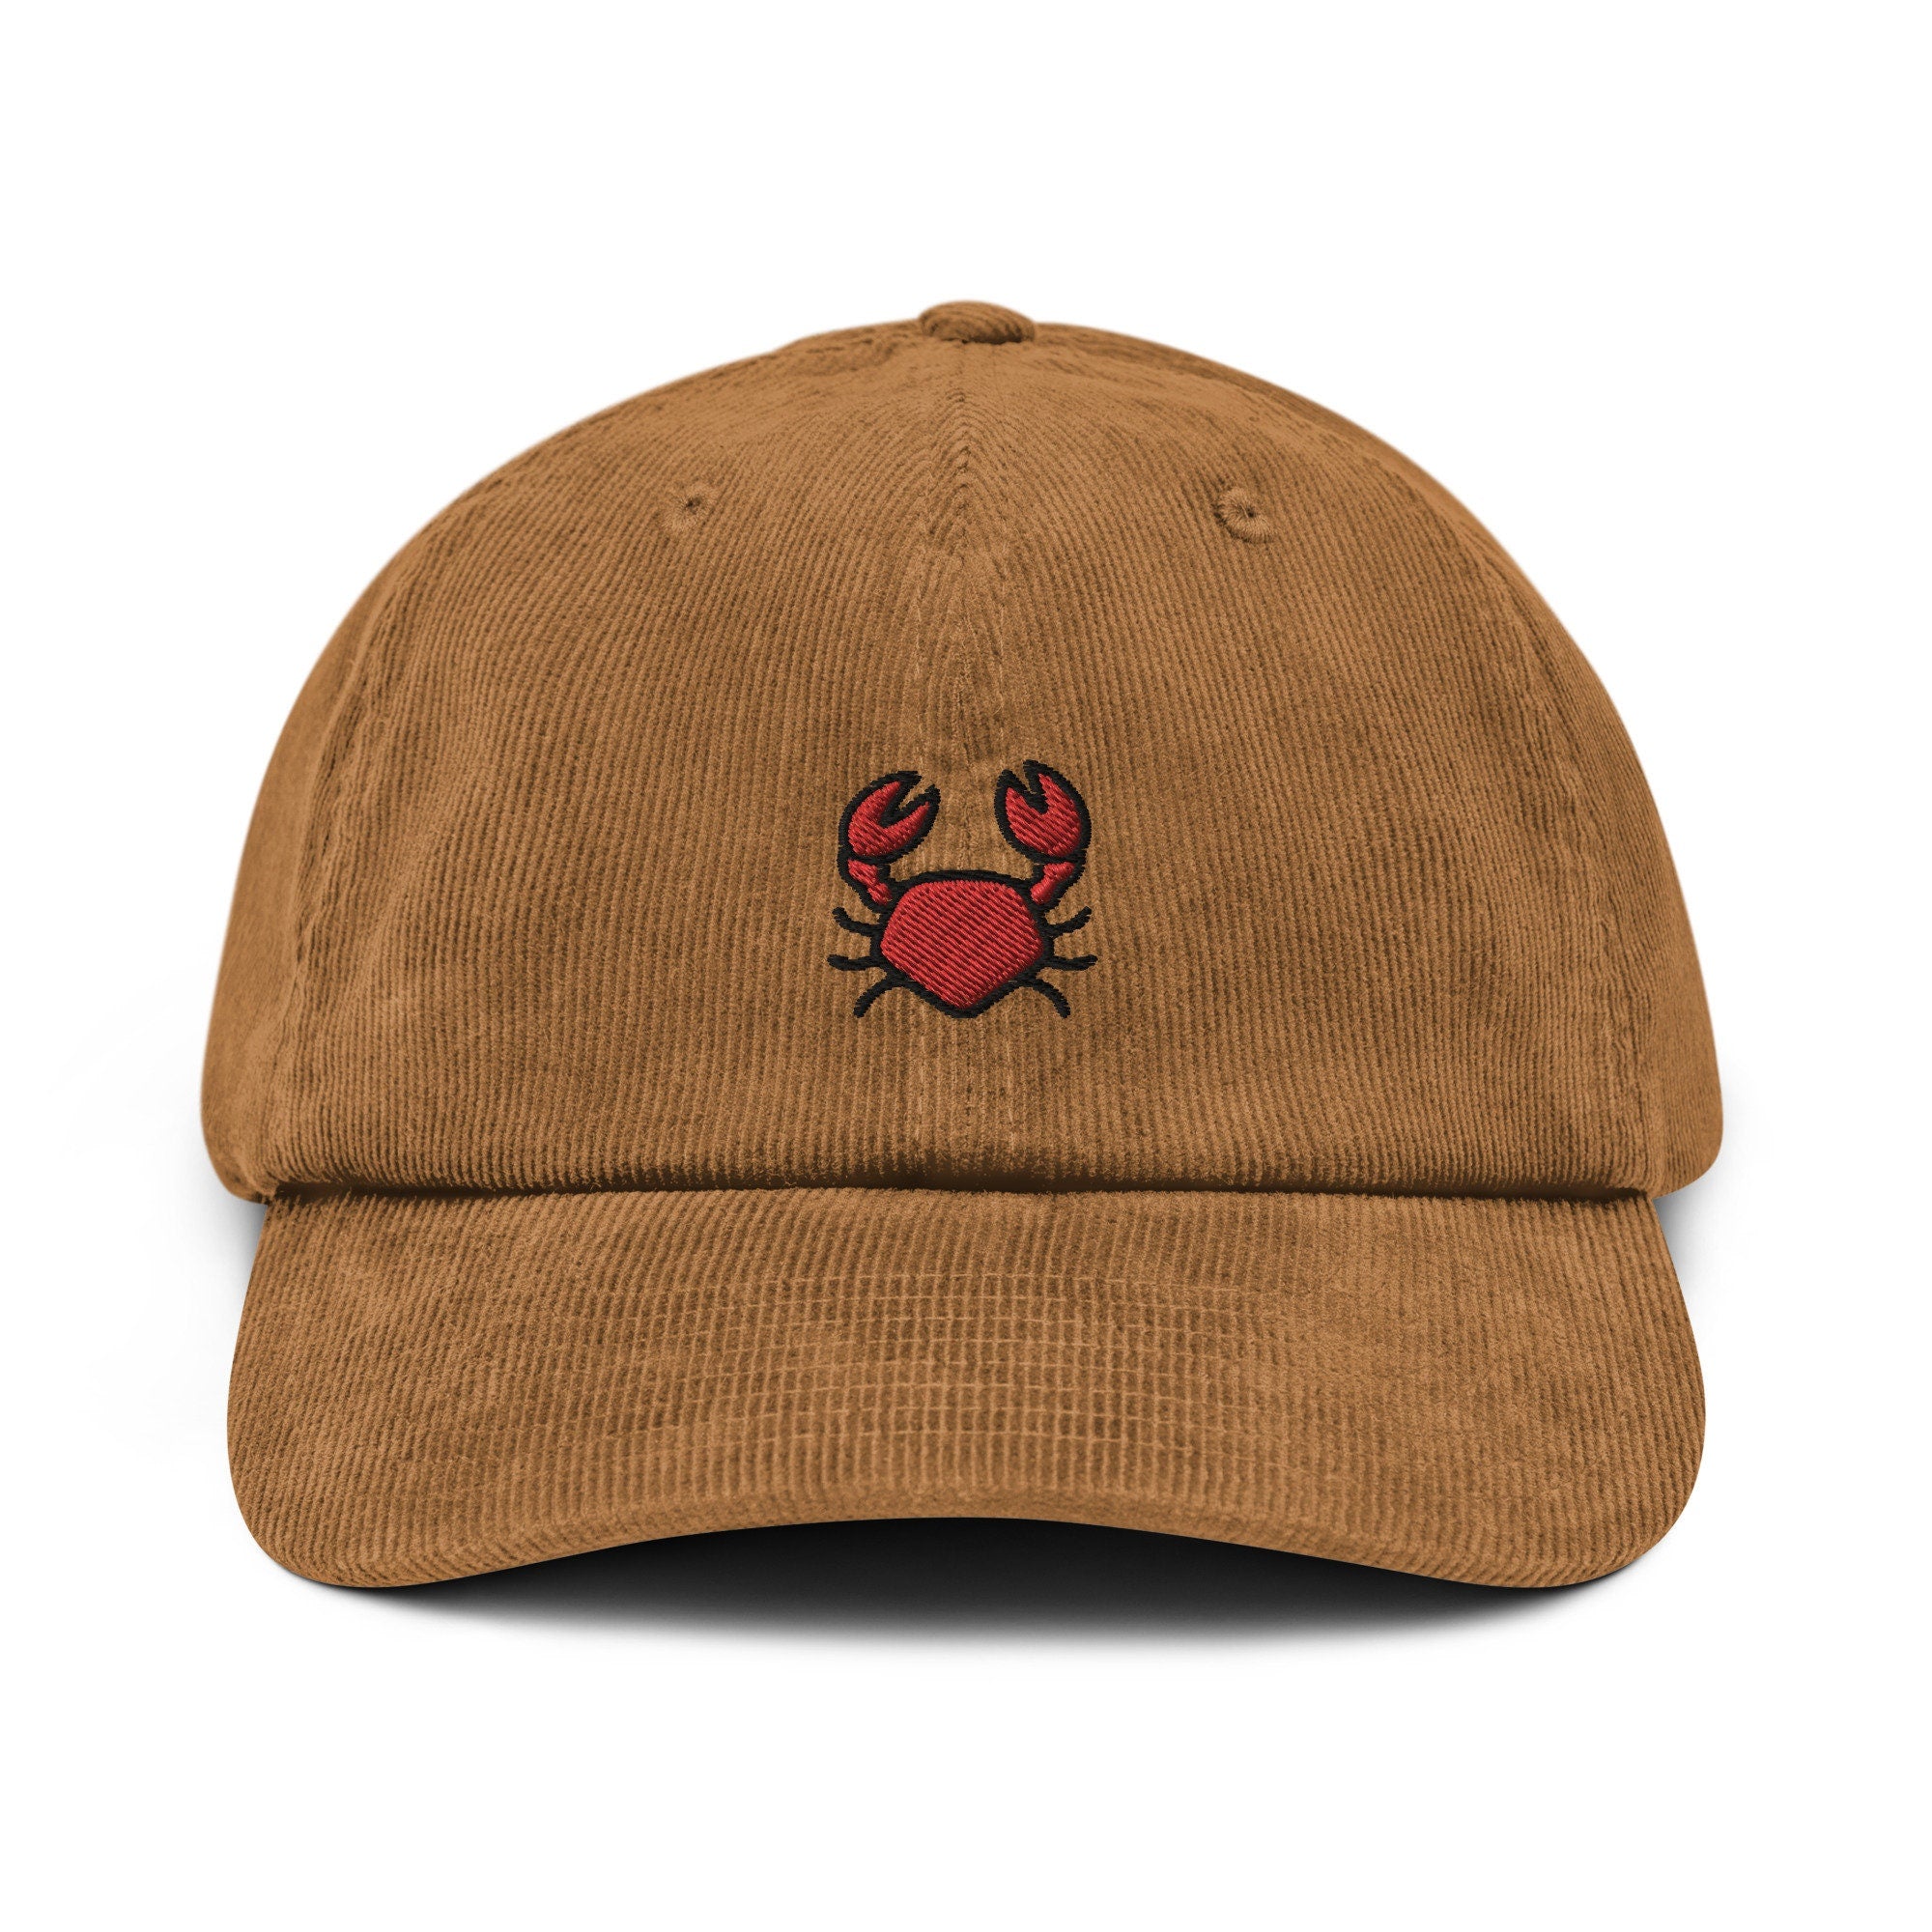 Crab Corduroy Hat, Handmade Embroidered Corduroy Dad Cap - Multiple Colors